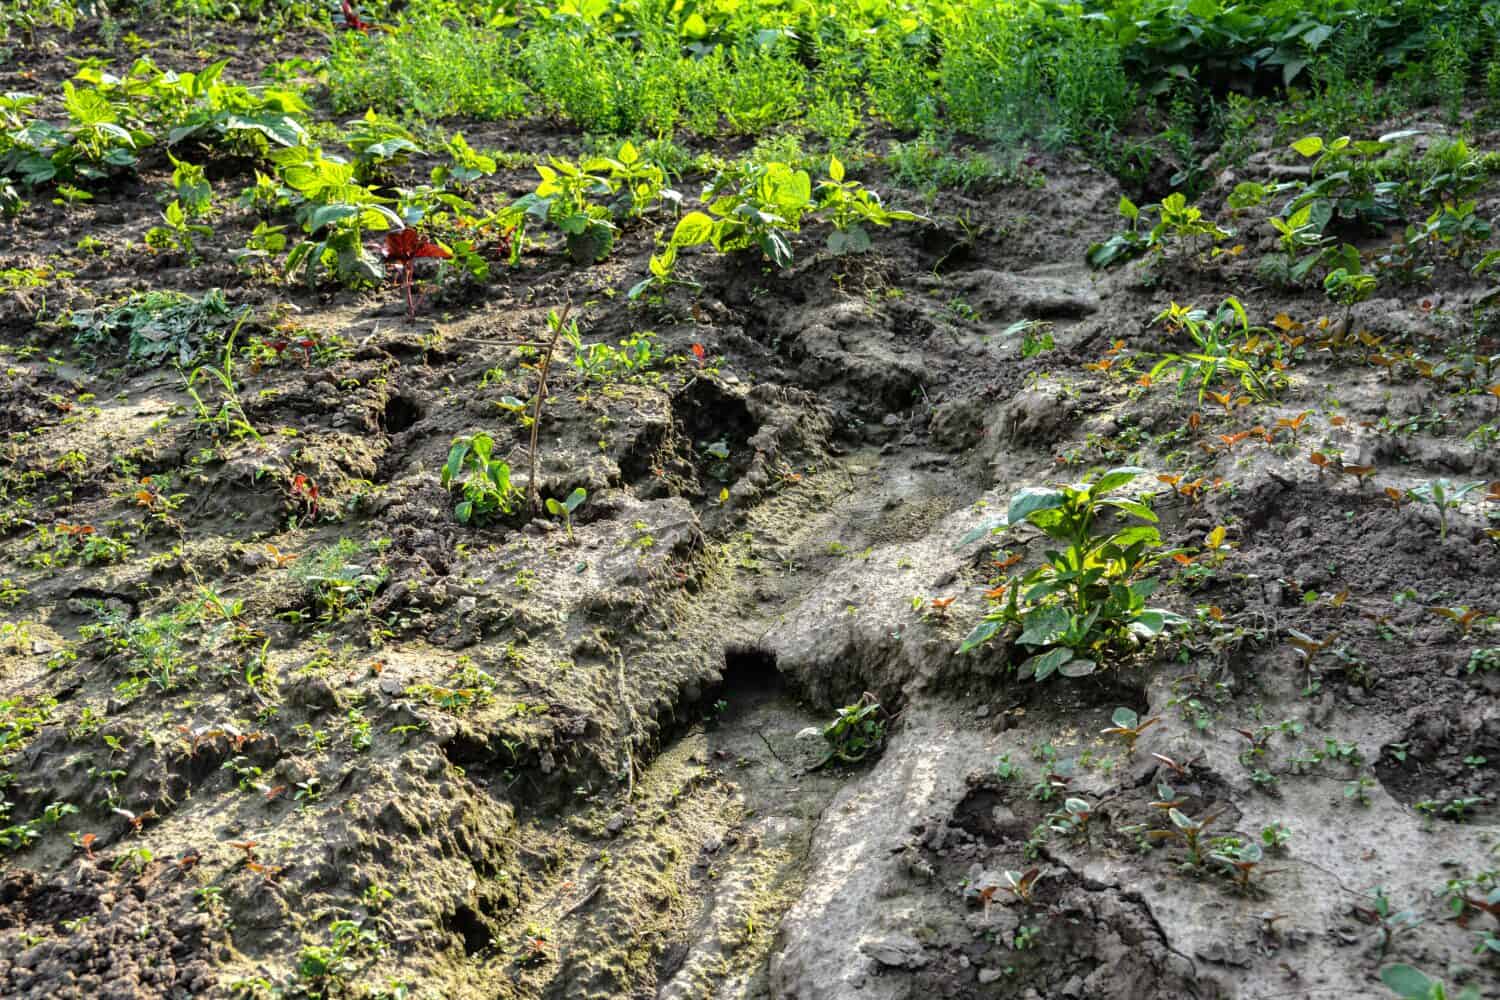 Heavy downpours and rains caused severe soil erosion on vegetable crops and significant losses in vegetable yields.